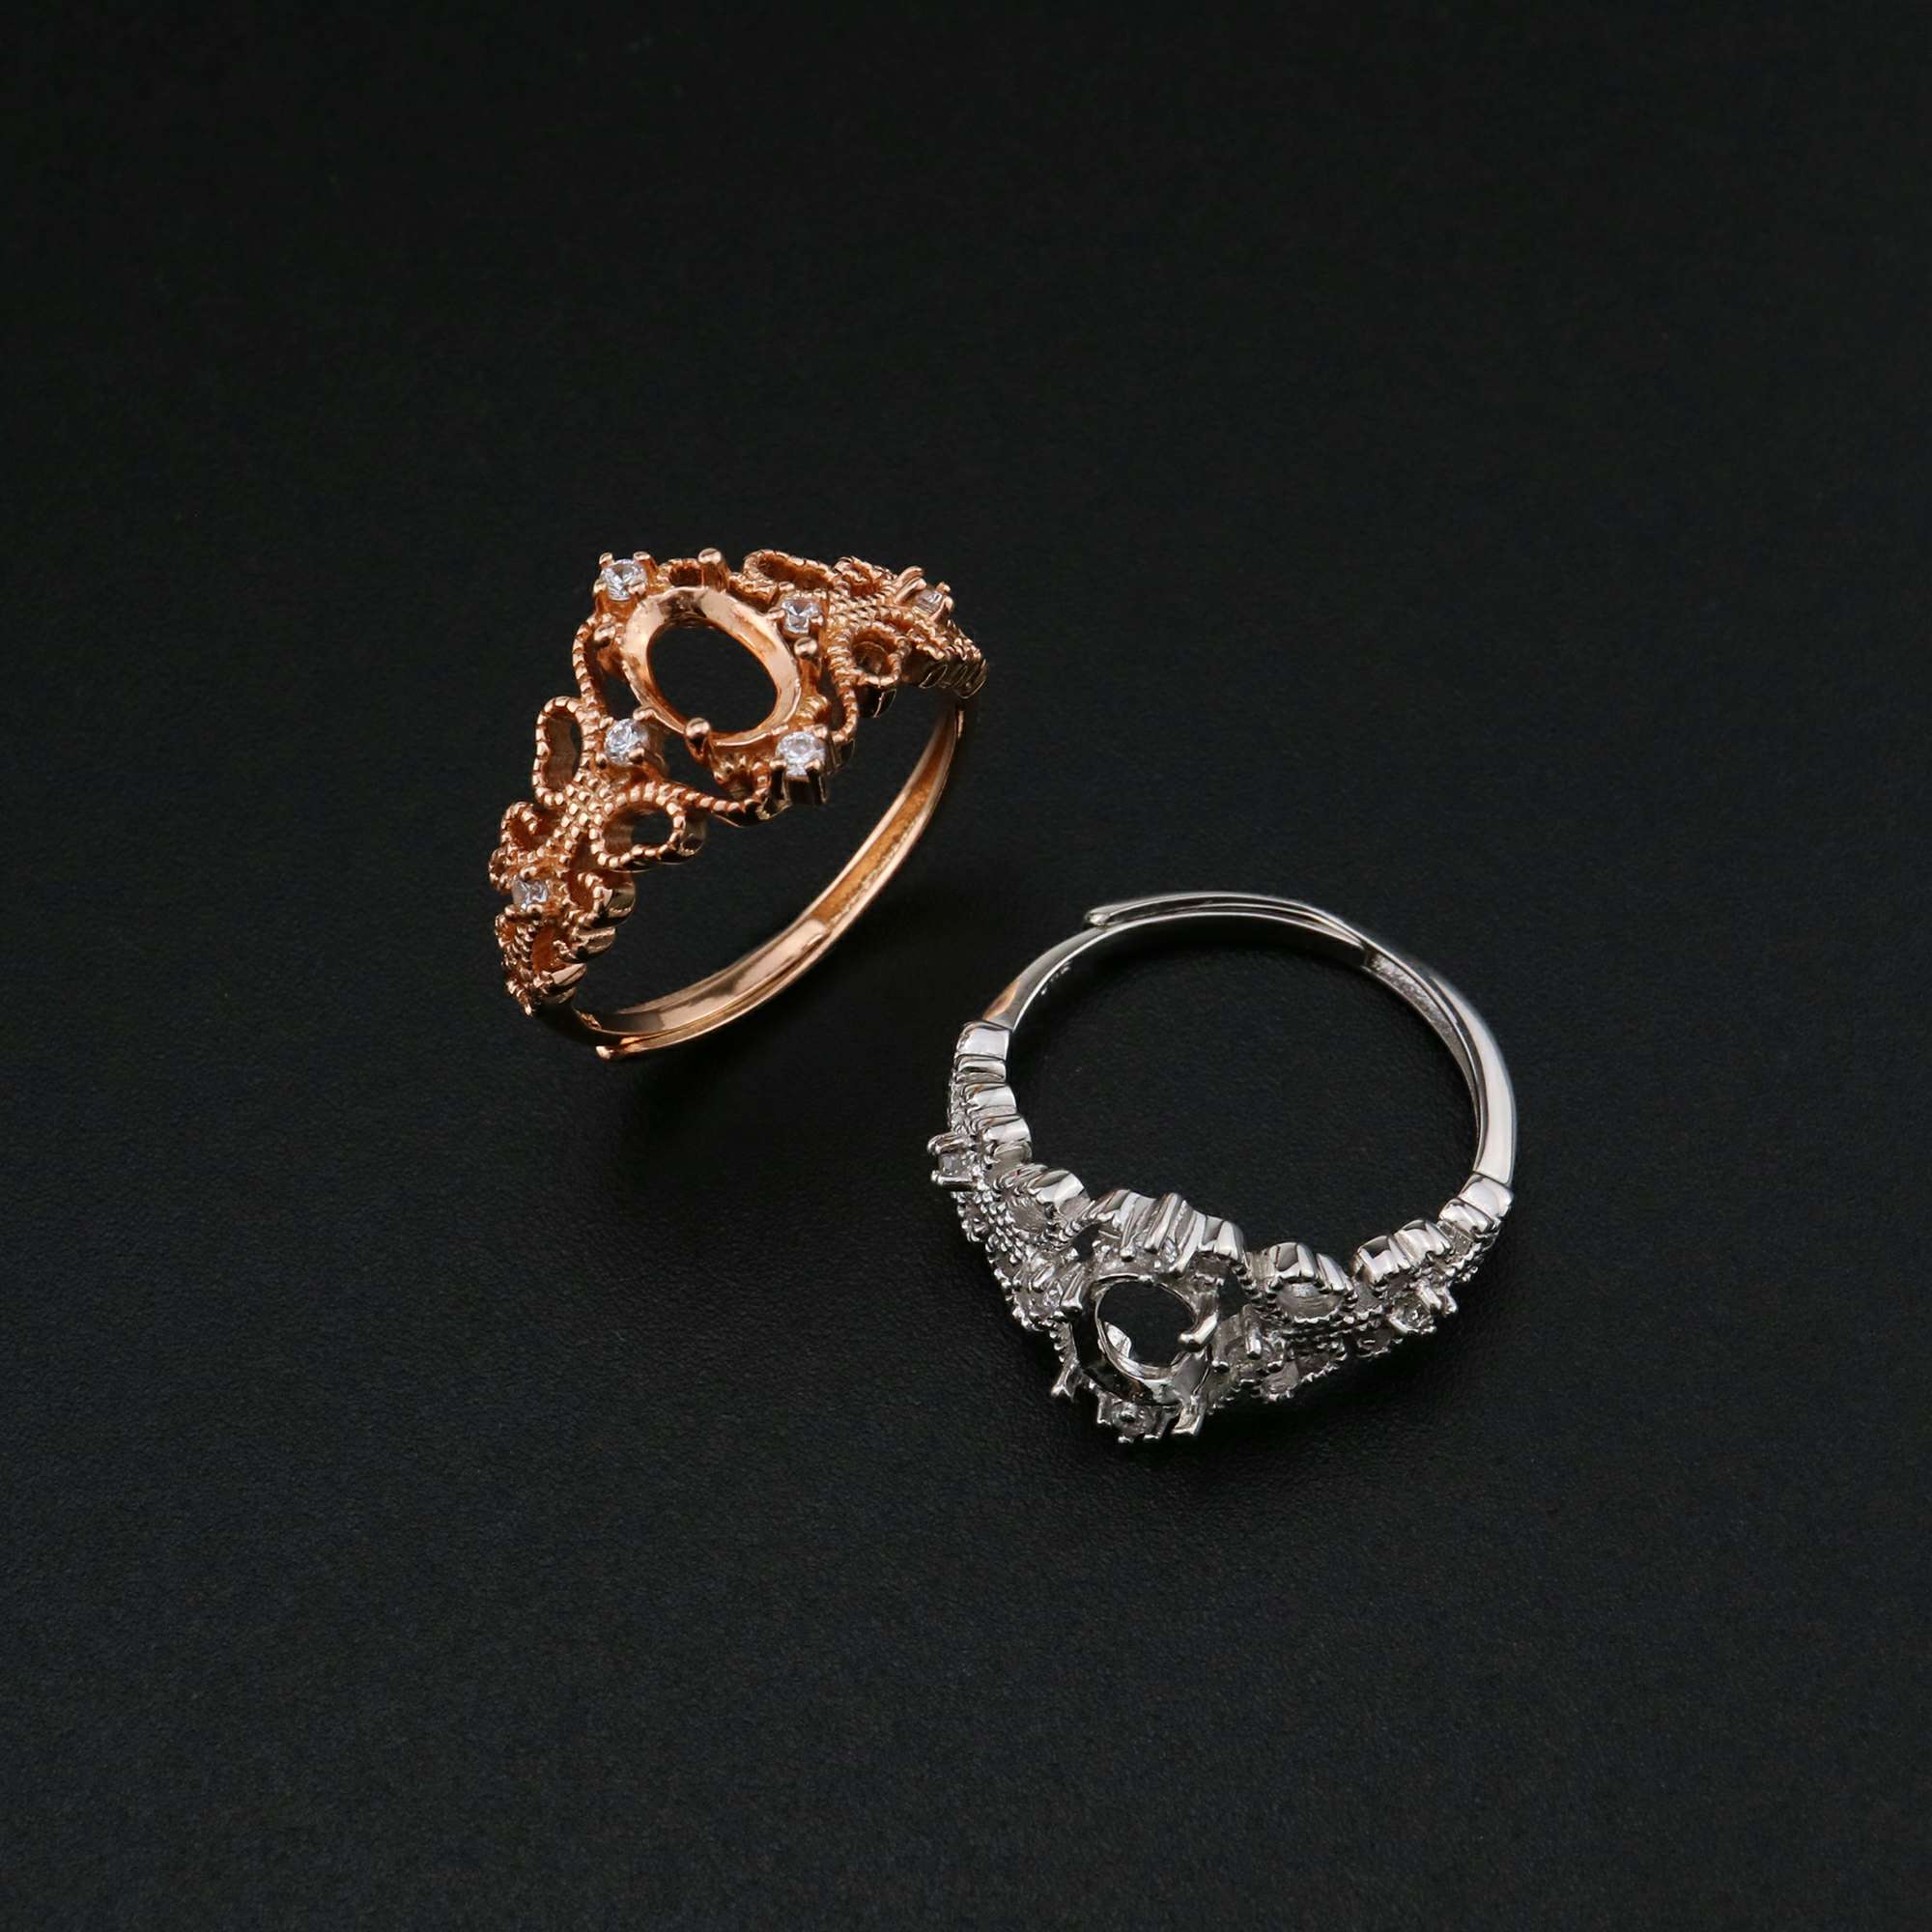 1Pcs 5x7MM Oval Prong Ring Settings Blank Adjustable Vintage Style Rose Gold Plated Solid 925 Sterling Silver DIY Bezel Tray for Gemstone 1224052 - Click Image to Close